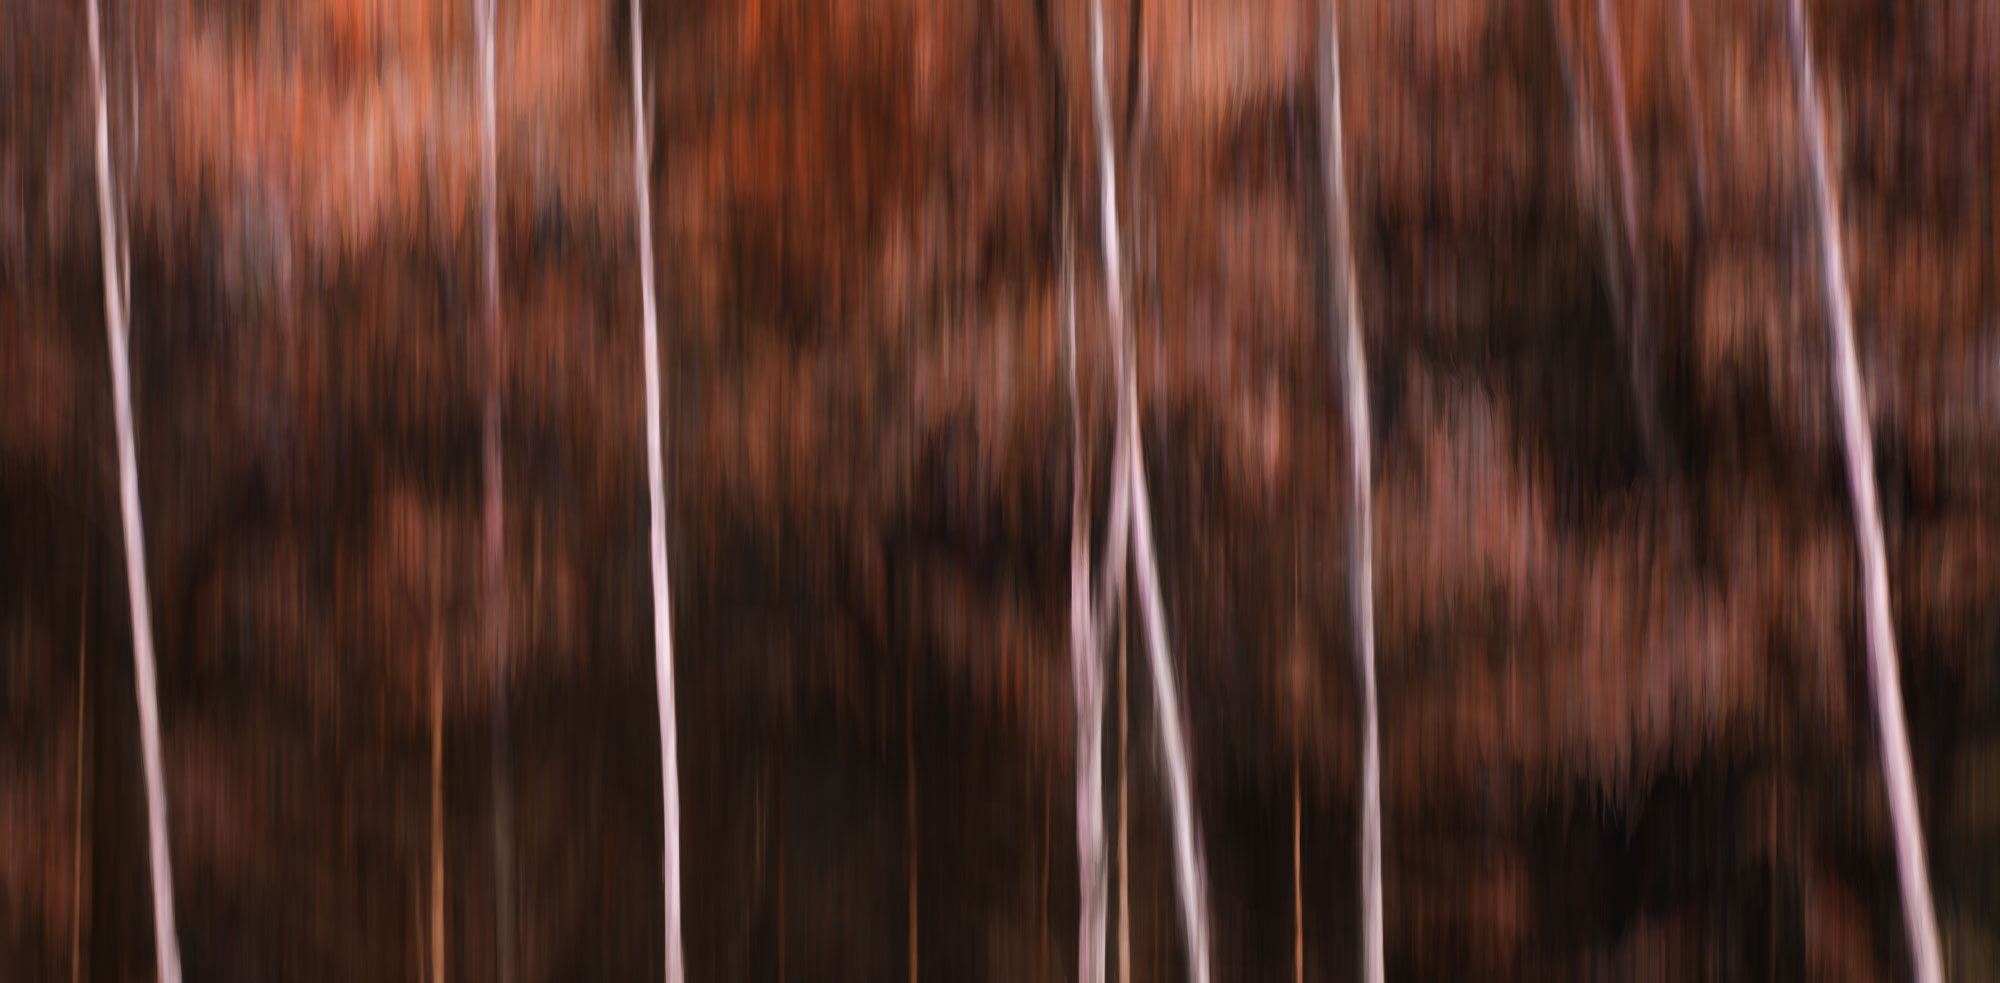 "ICM photography of trees in the Italian Dolomites, showcasing deep autumn colors in a blurred, artistic style."